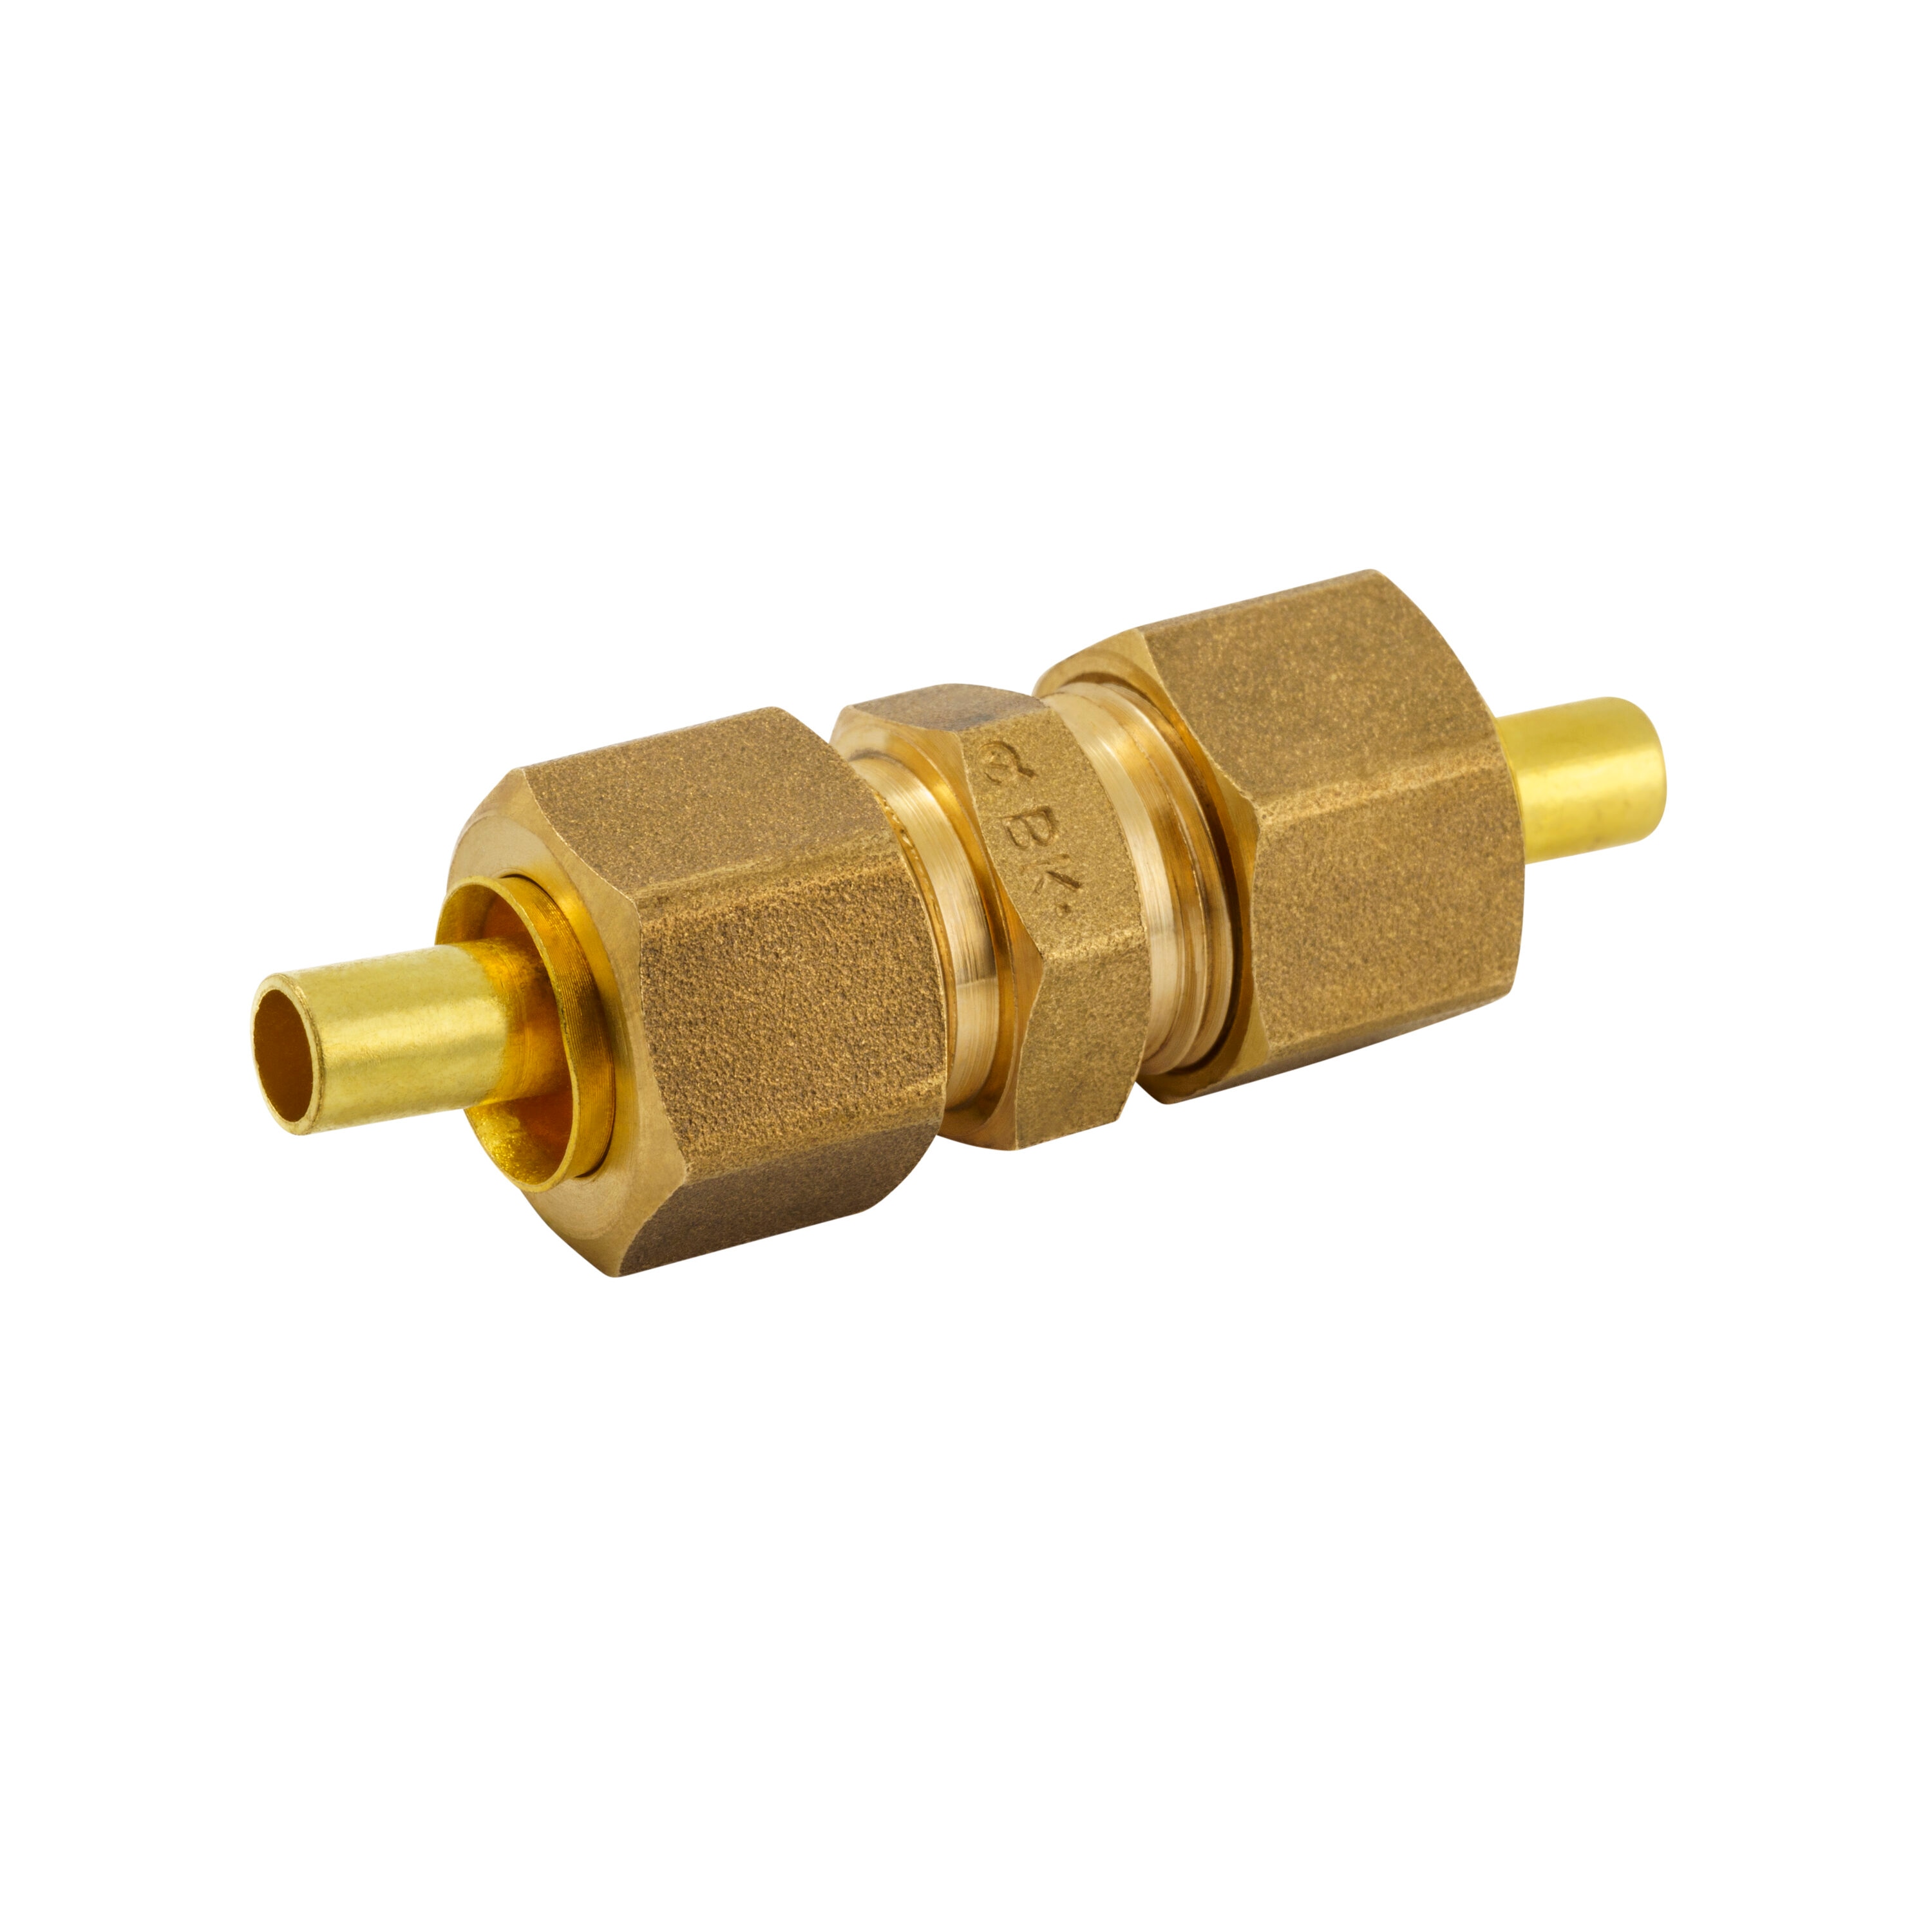 Proline Series 3/8-in x 3/8-in Compression Coupling Union Fitting